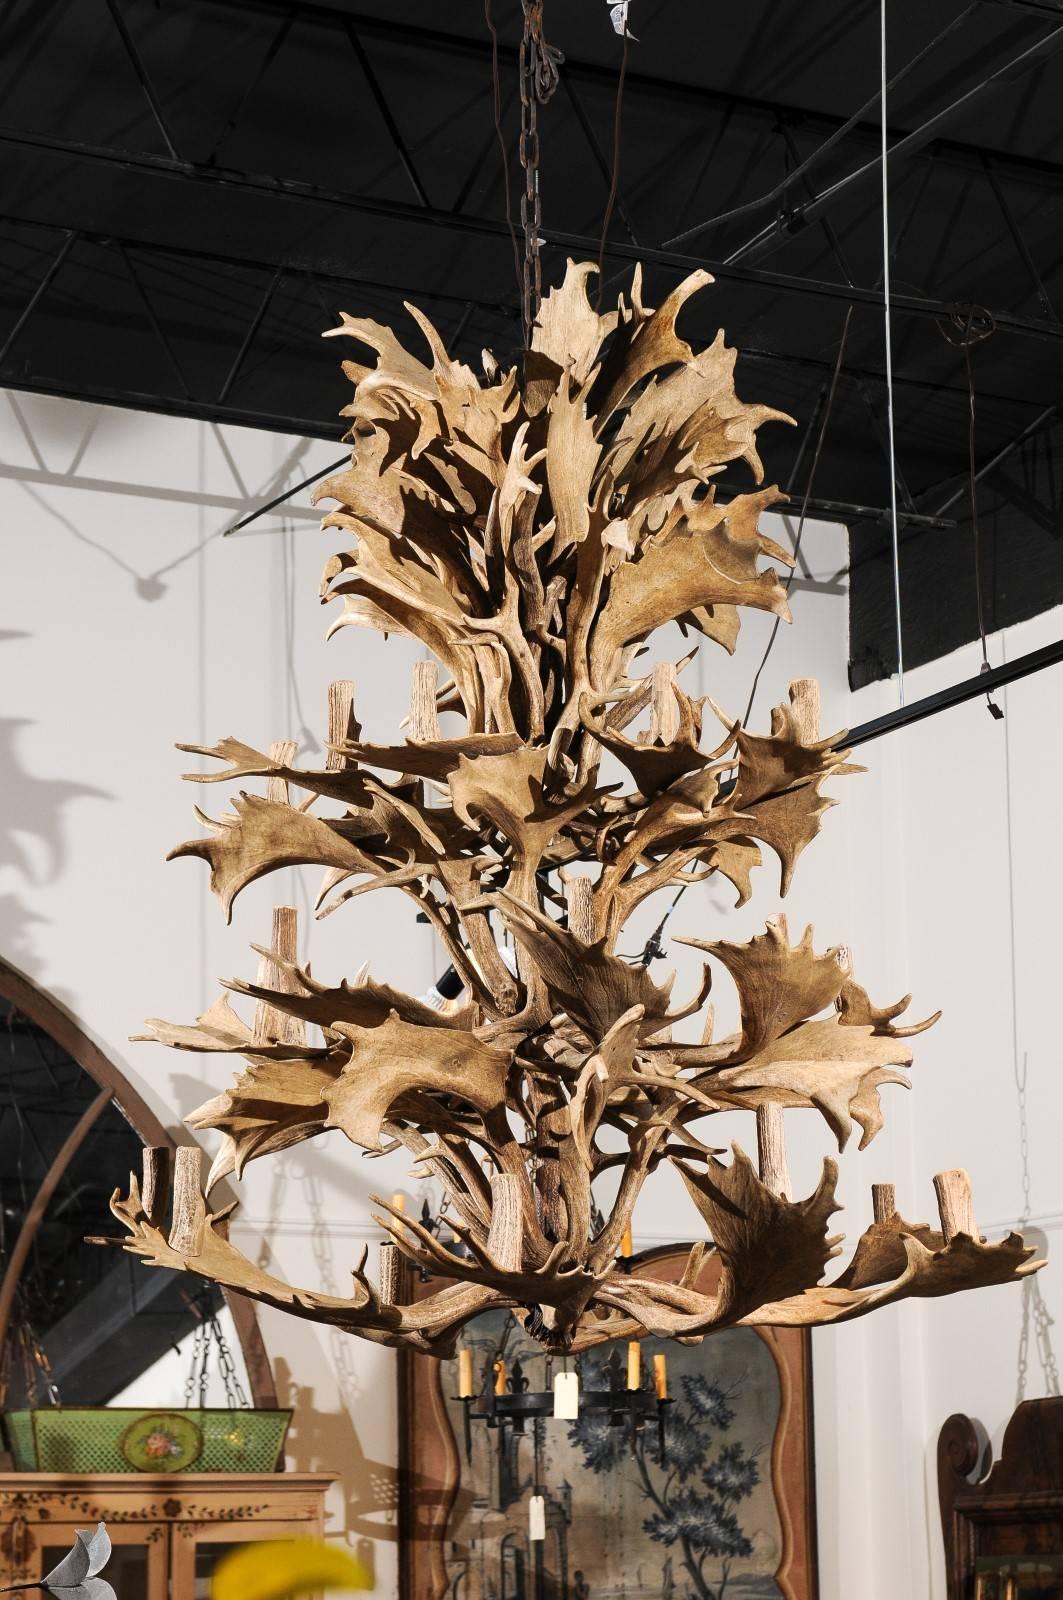 A 24-light continental four-tiered antler rustic chandelier, from the mid 20th century. This light fixture was made of naturally shed antlers in Europe during the 1940s. The tall and striking silhouette comprises four levels, the two lower ones